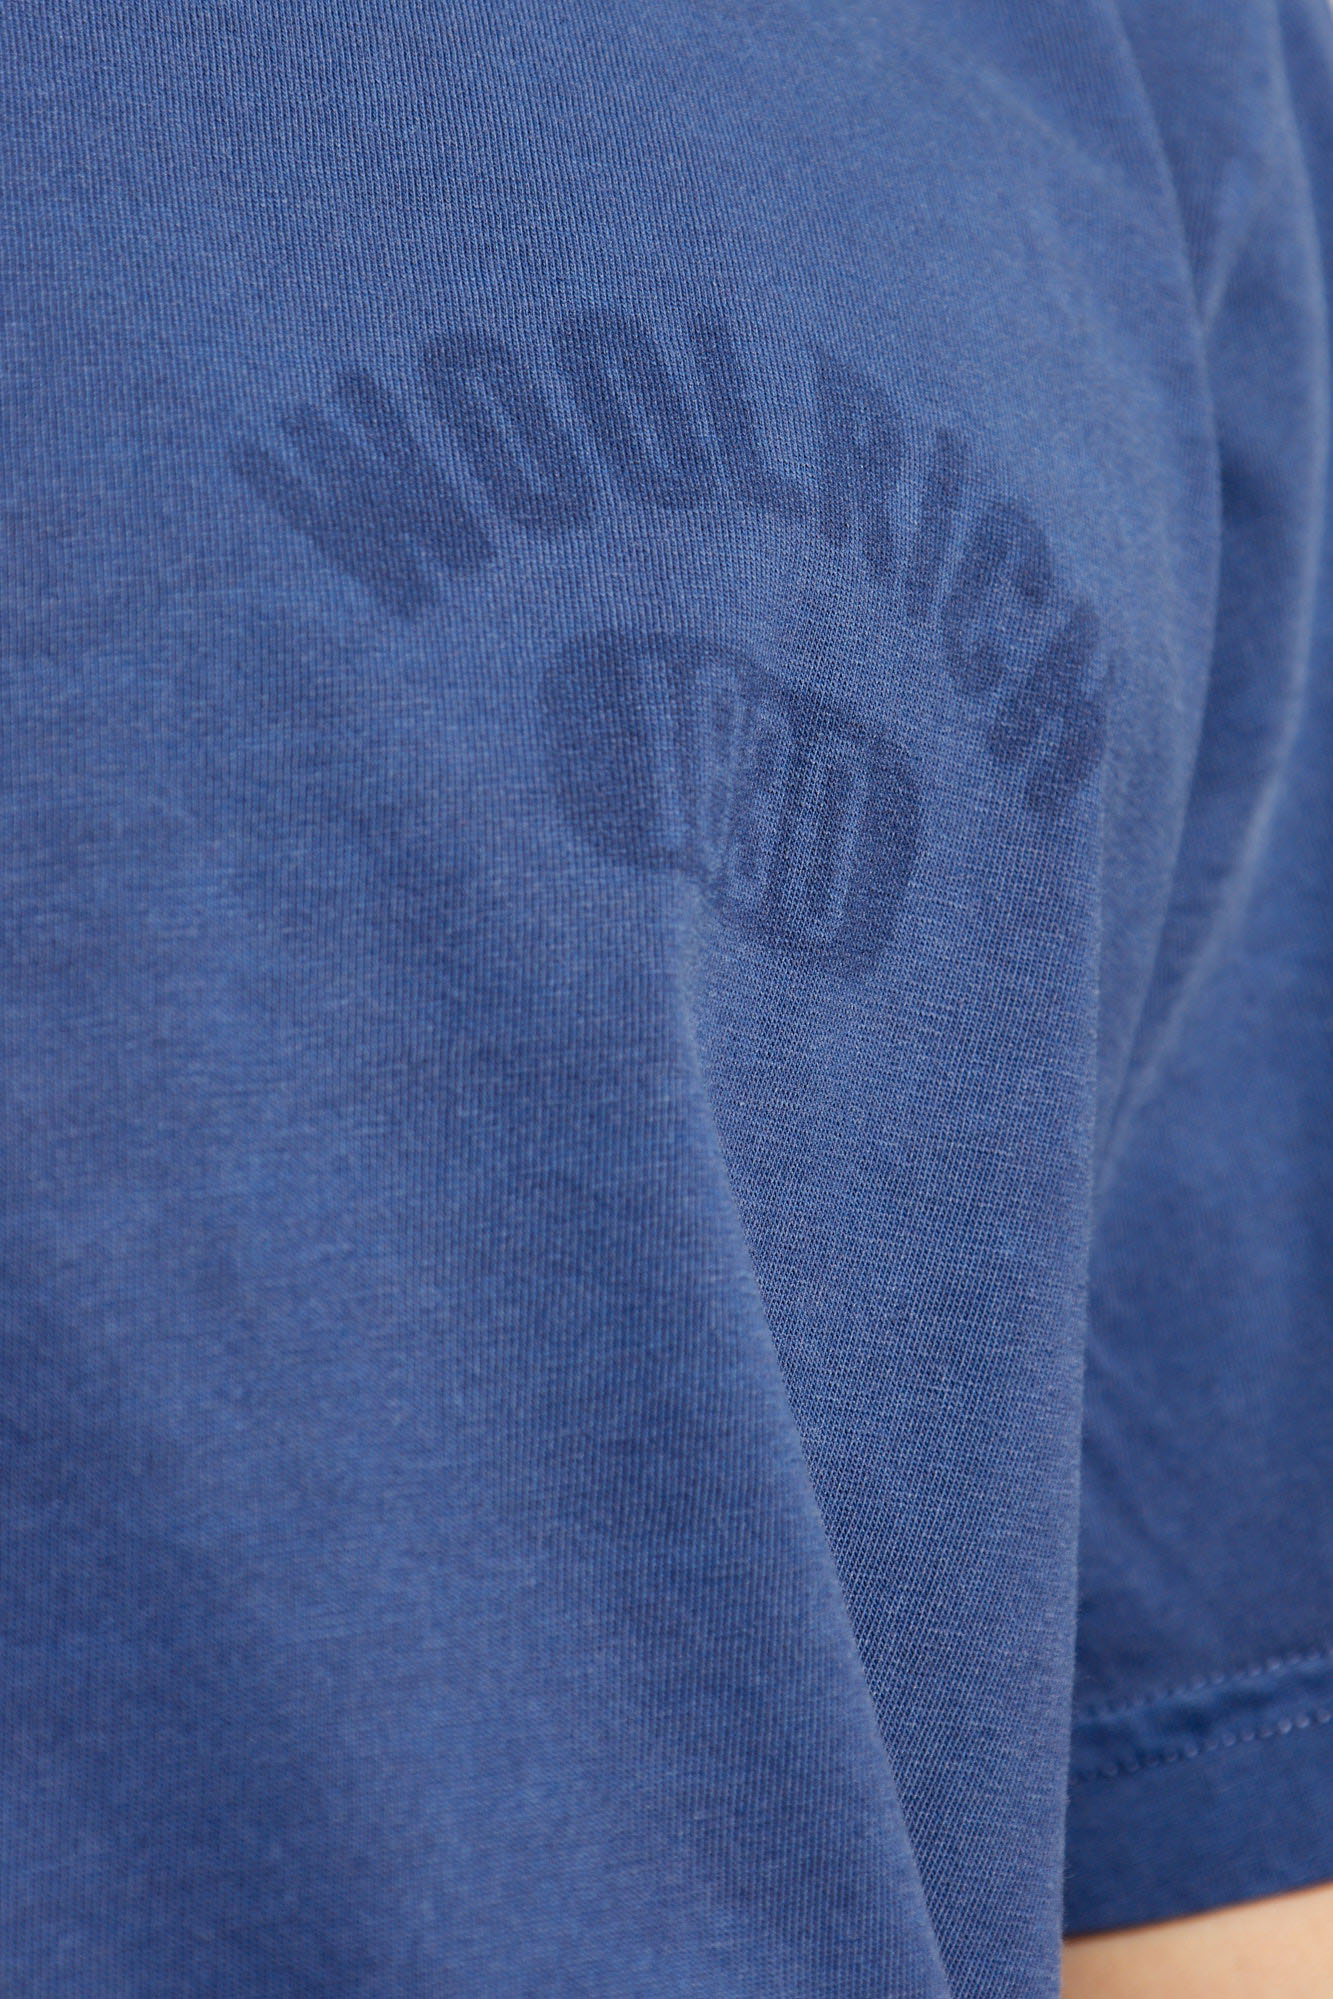 Woolrich T-shirt Ermanno with logo